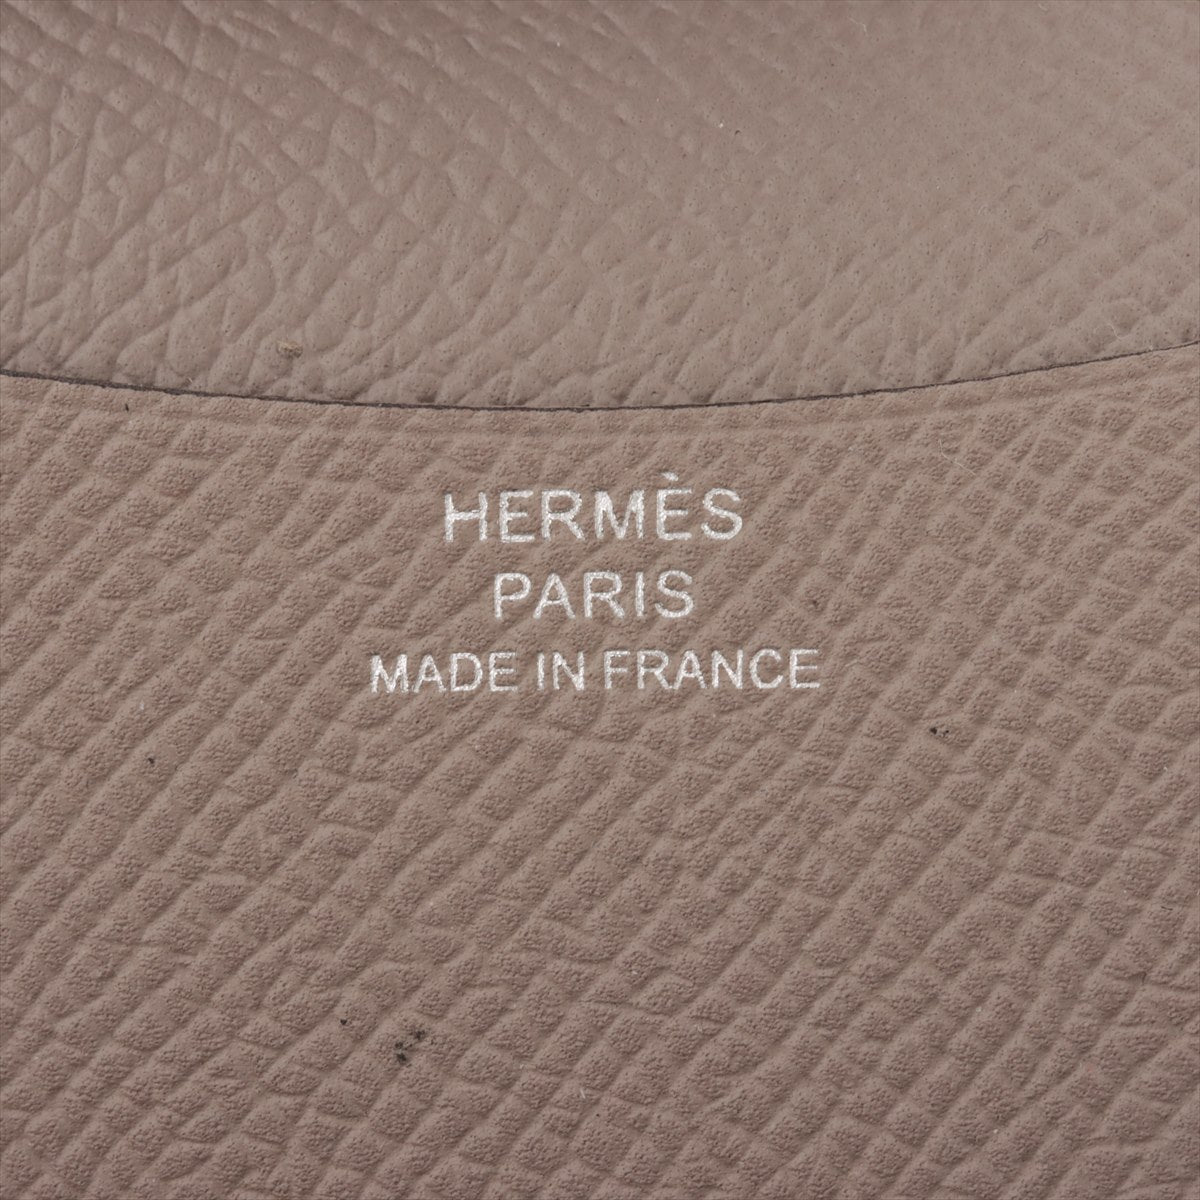 Hermès Agenda PM Veau Epsom Notebook cover Gold Silver Metal fittings A:2017